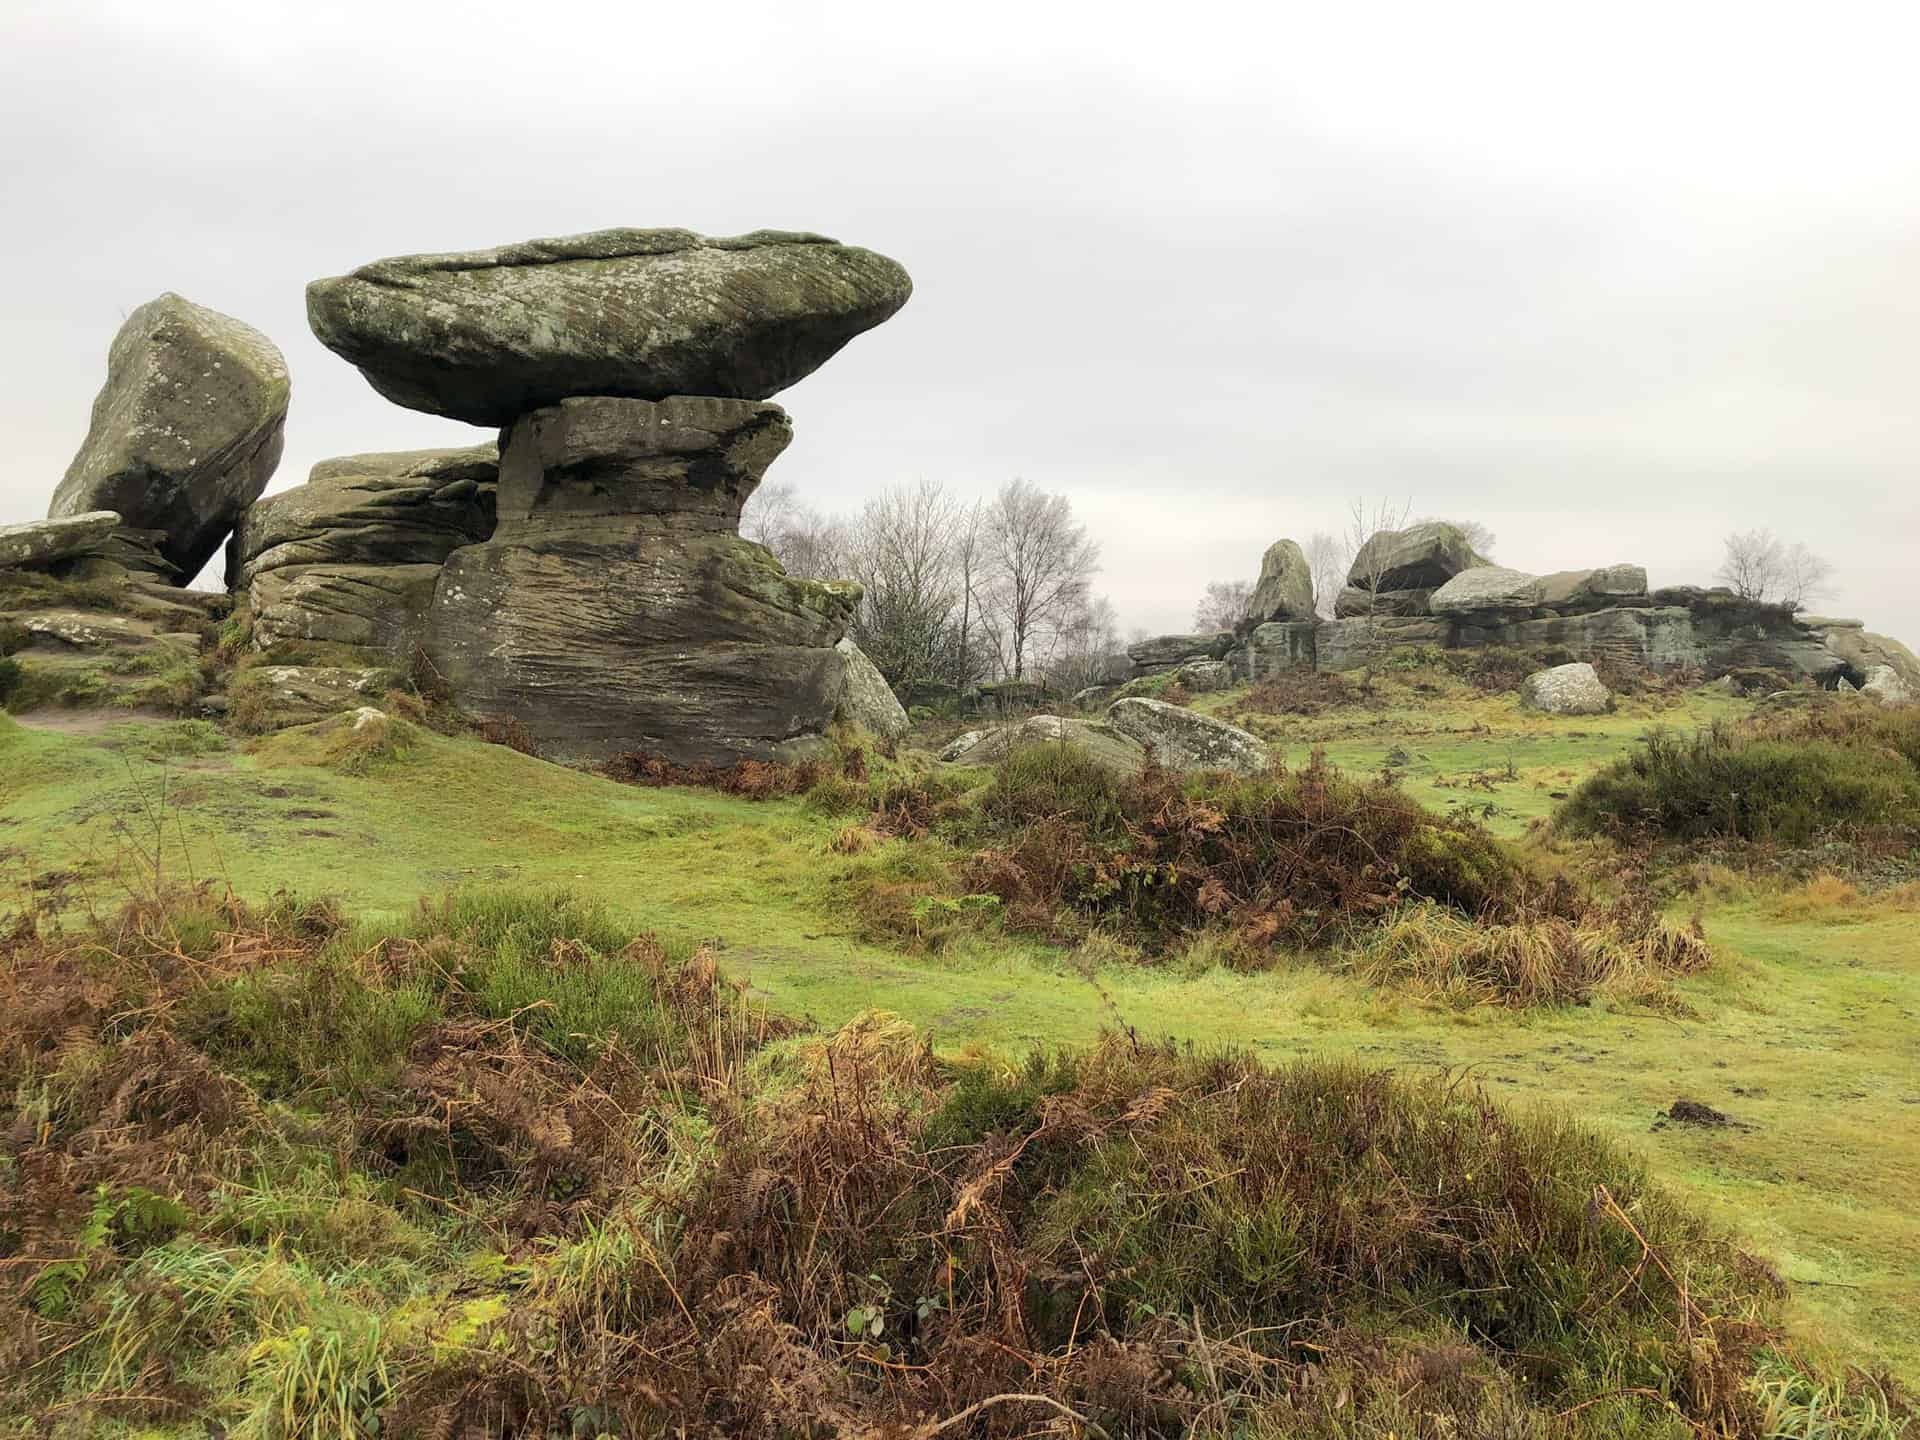 The Brimham Rocks site has been featured in children's television, notably in 'Roger and the Rottentrolls' and a single episode of 'Knightmare' series six.